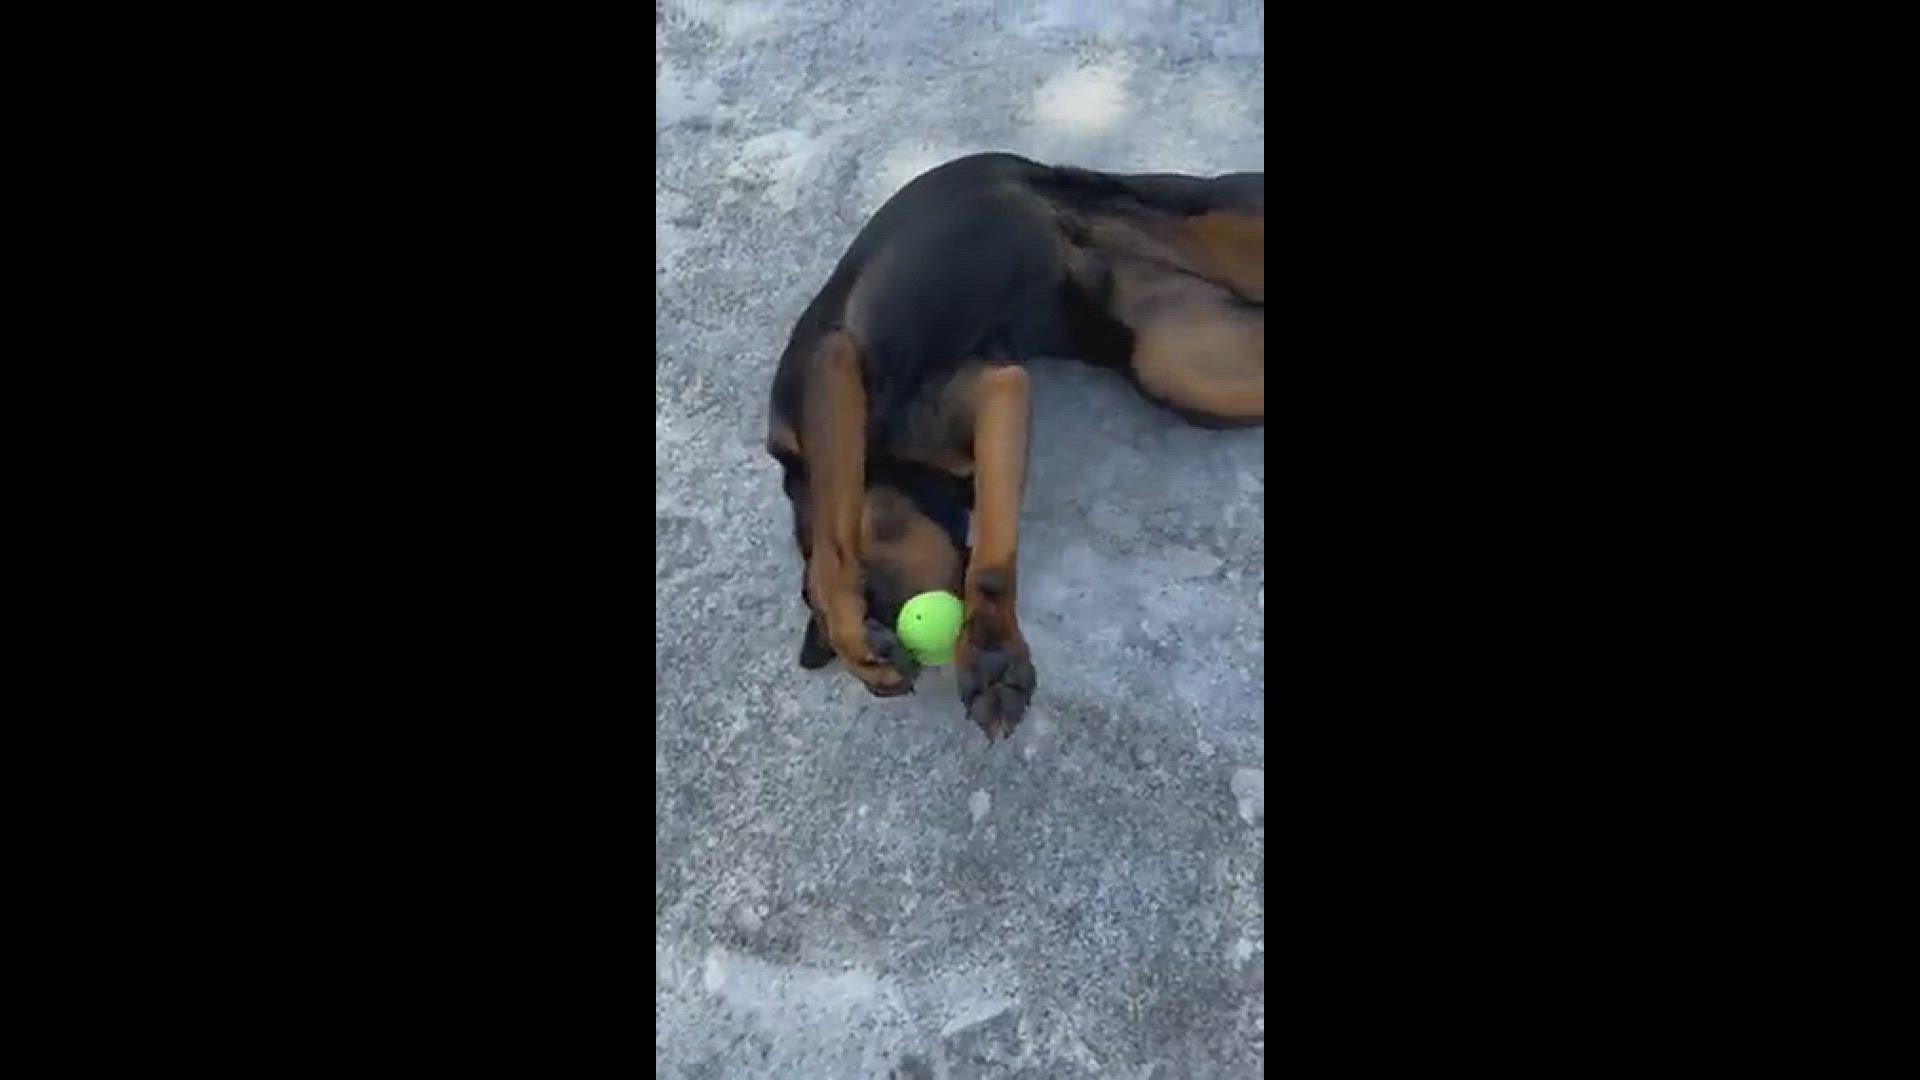 She loves to play with this certain ball. Rolls on her back and plays catch.  Might drop it for me to chase.
Credit: Lisa